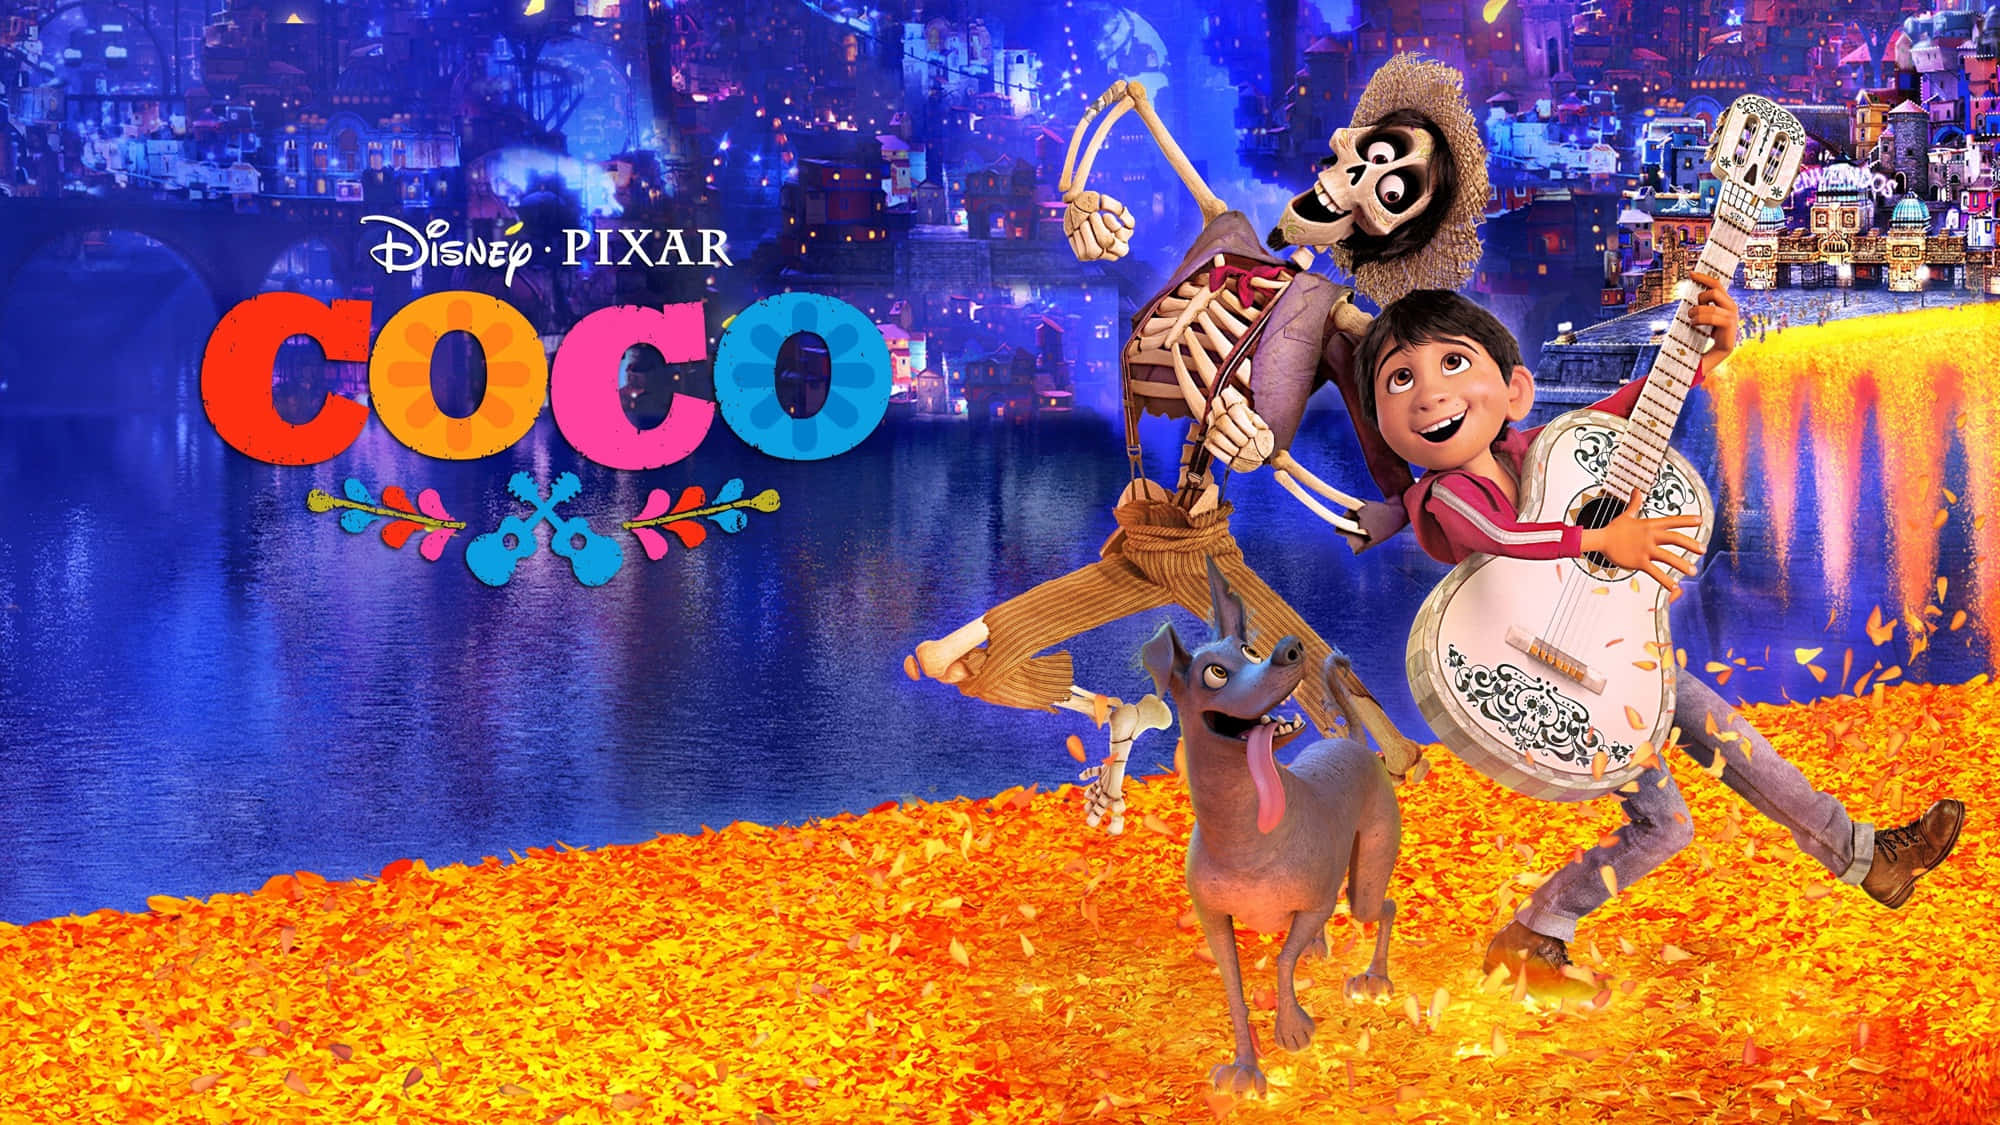 Say hello to the vibrant, colorful world of Coco!